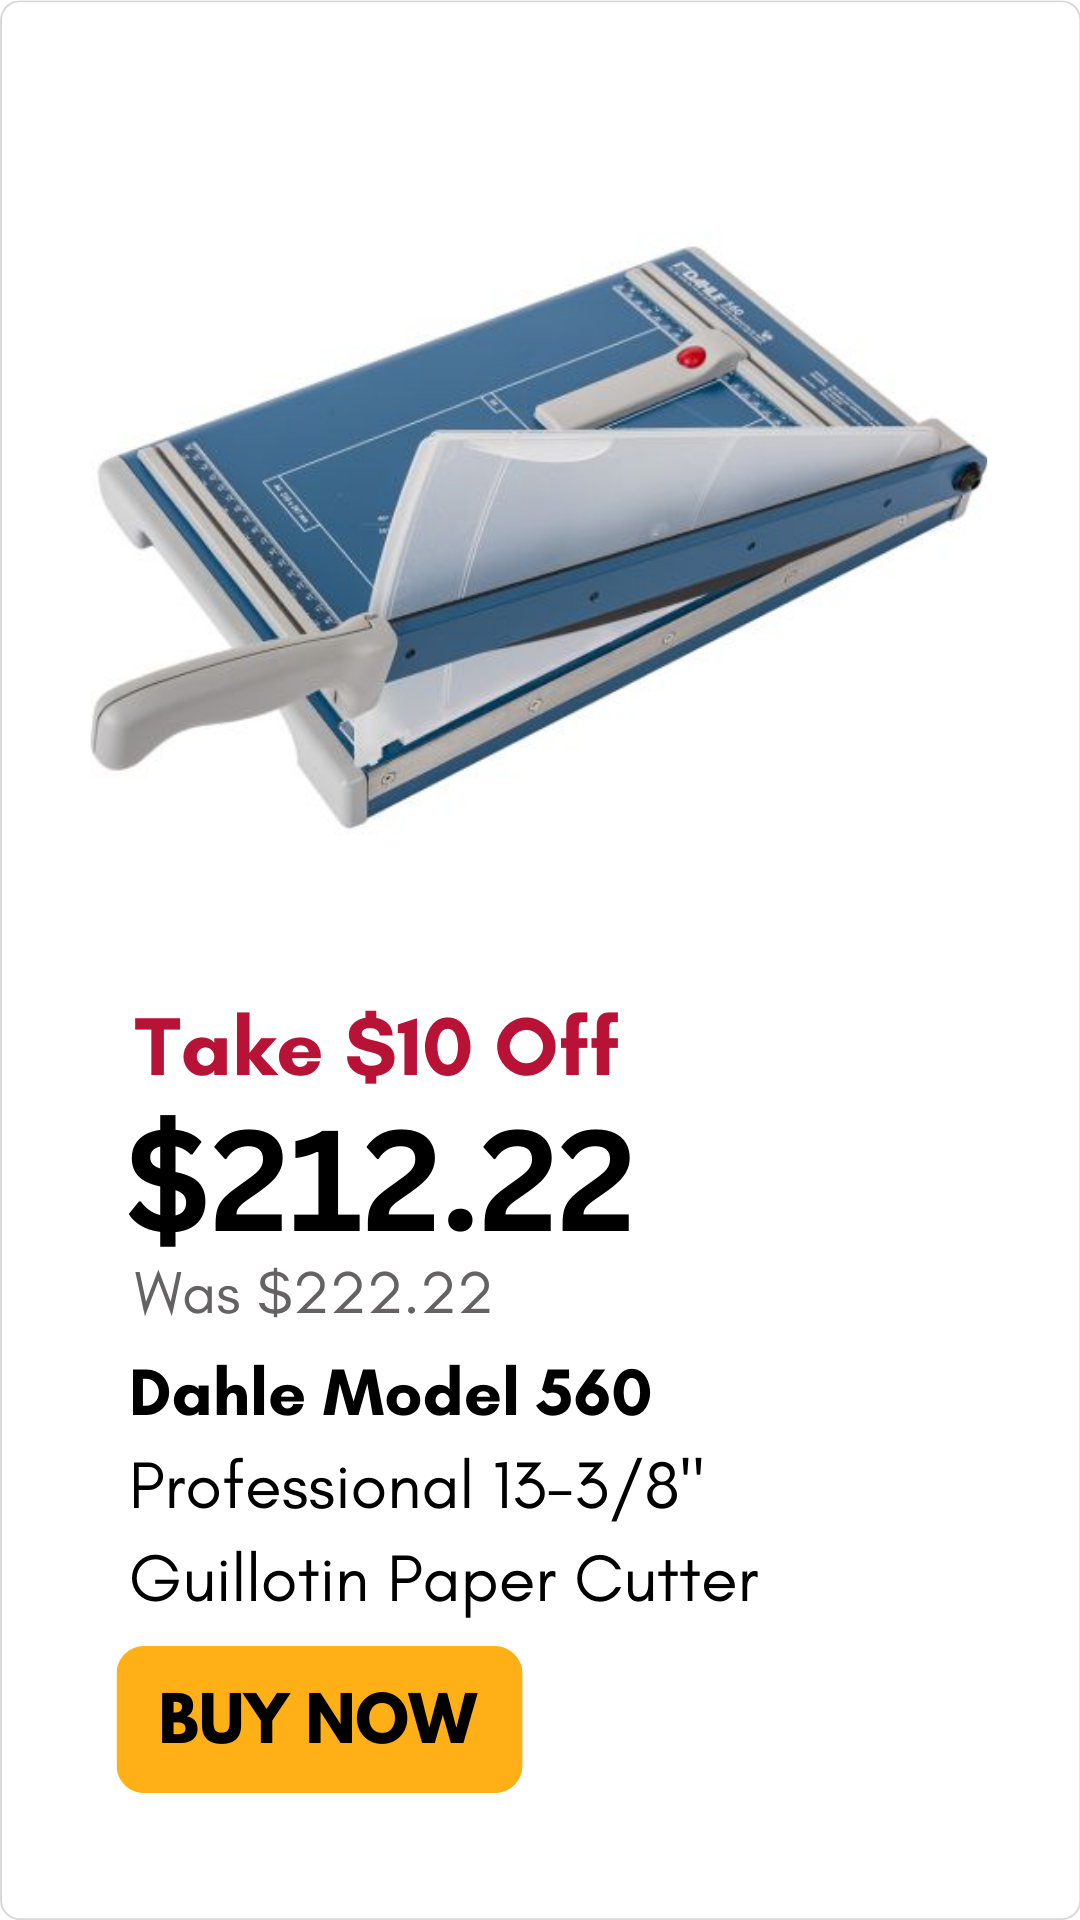 Dahle Model 560 Professional 13-3/8" Guillotine Paper Cutter